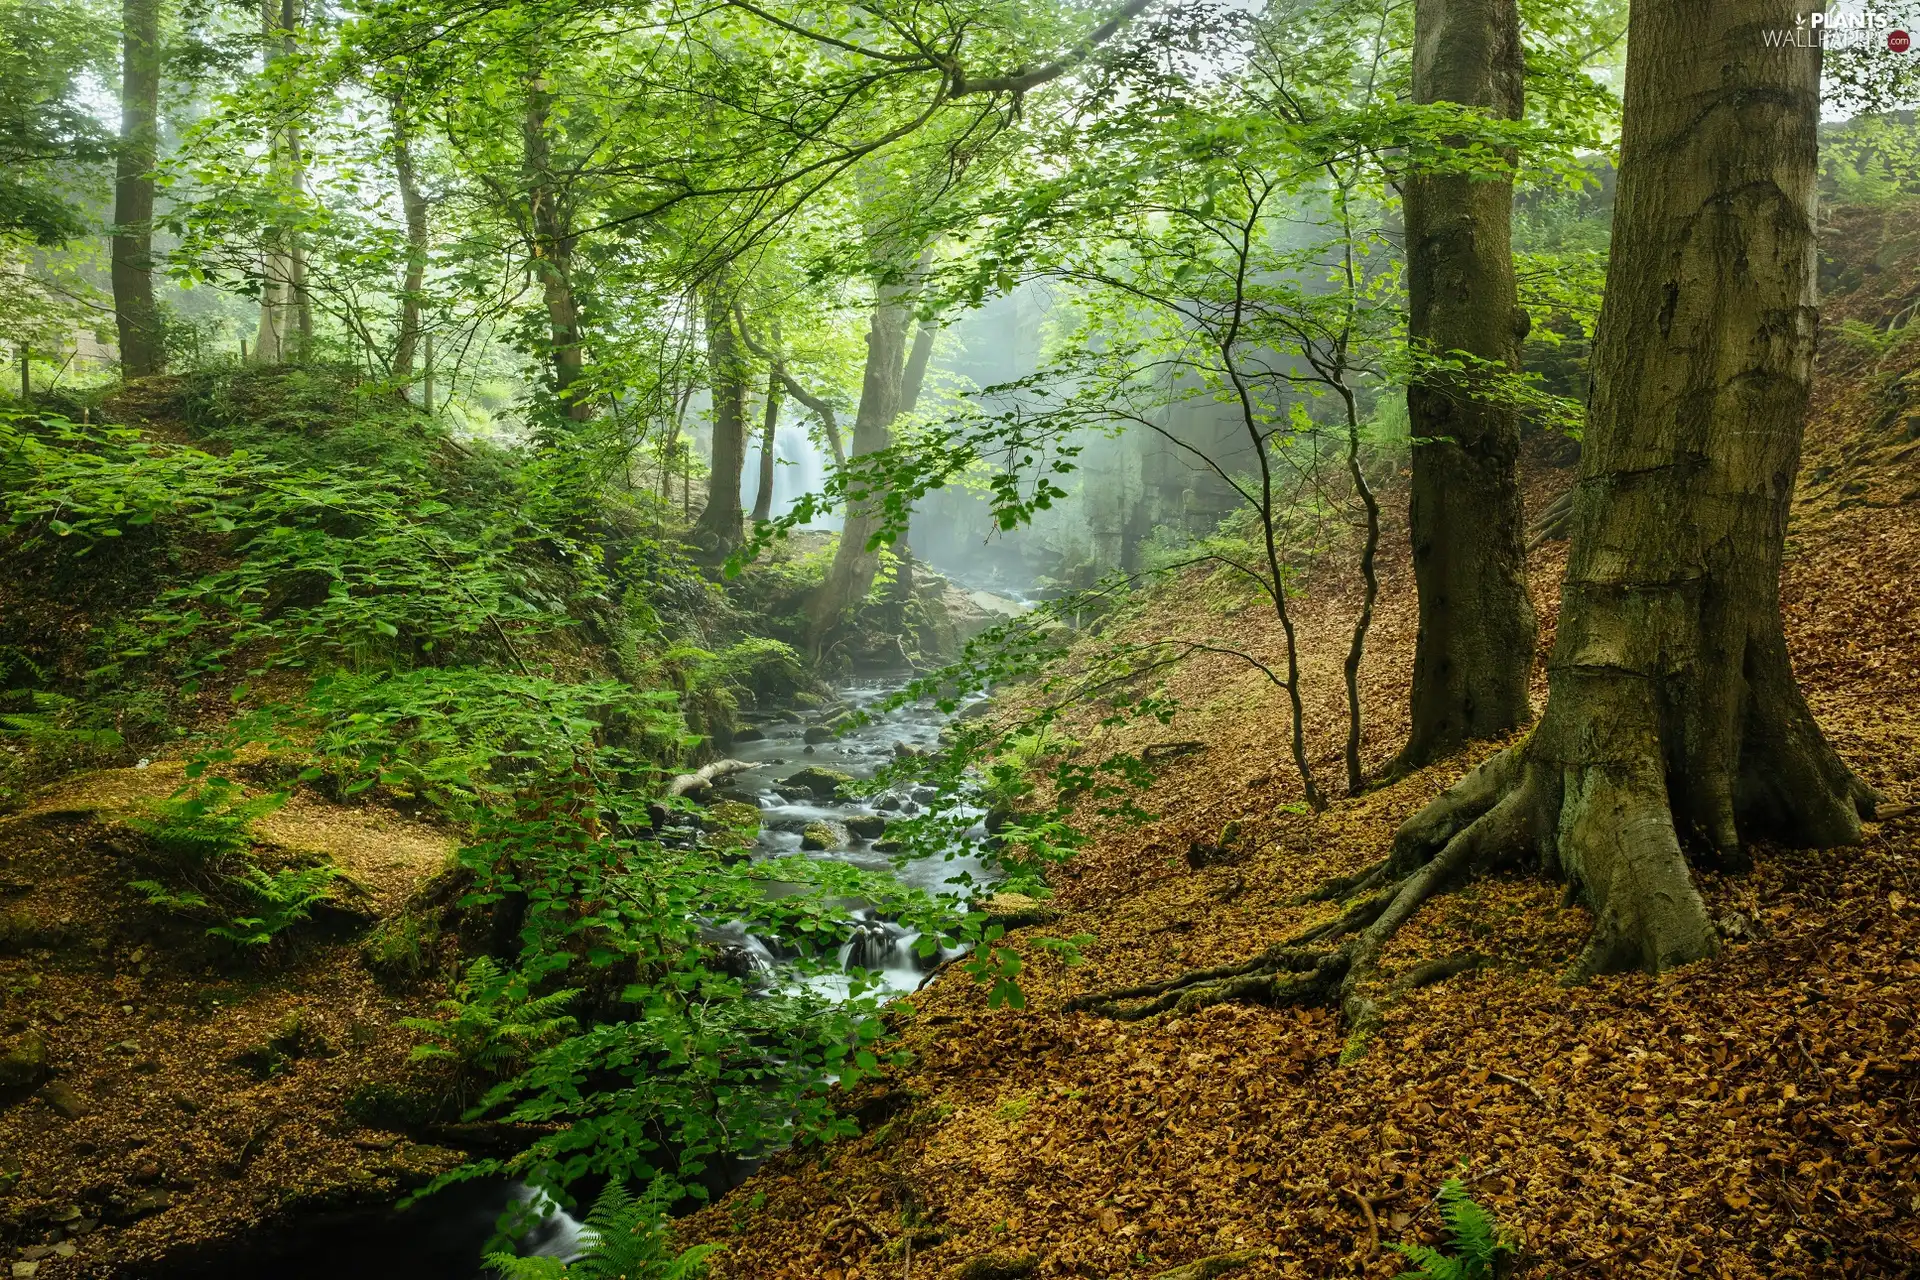 Peak District National Park, forest, Fog, trees, stream, County Derbyshire, England, viewes